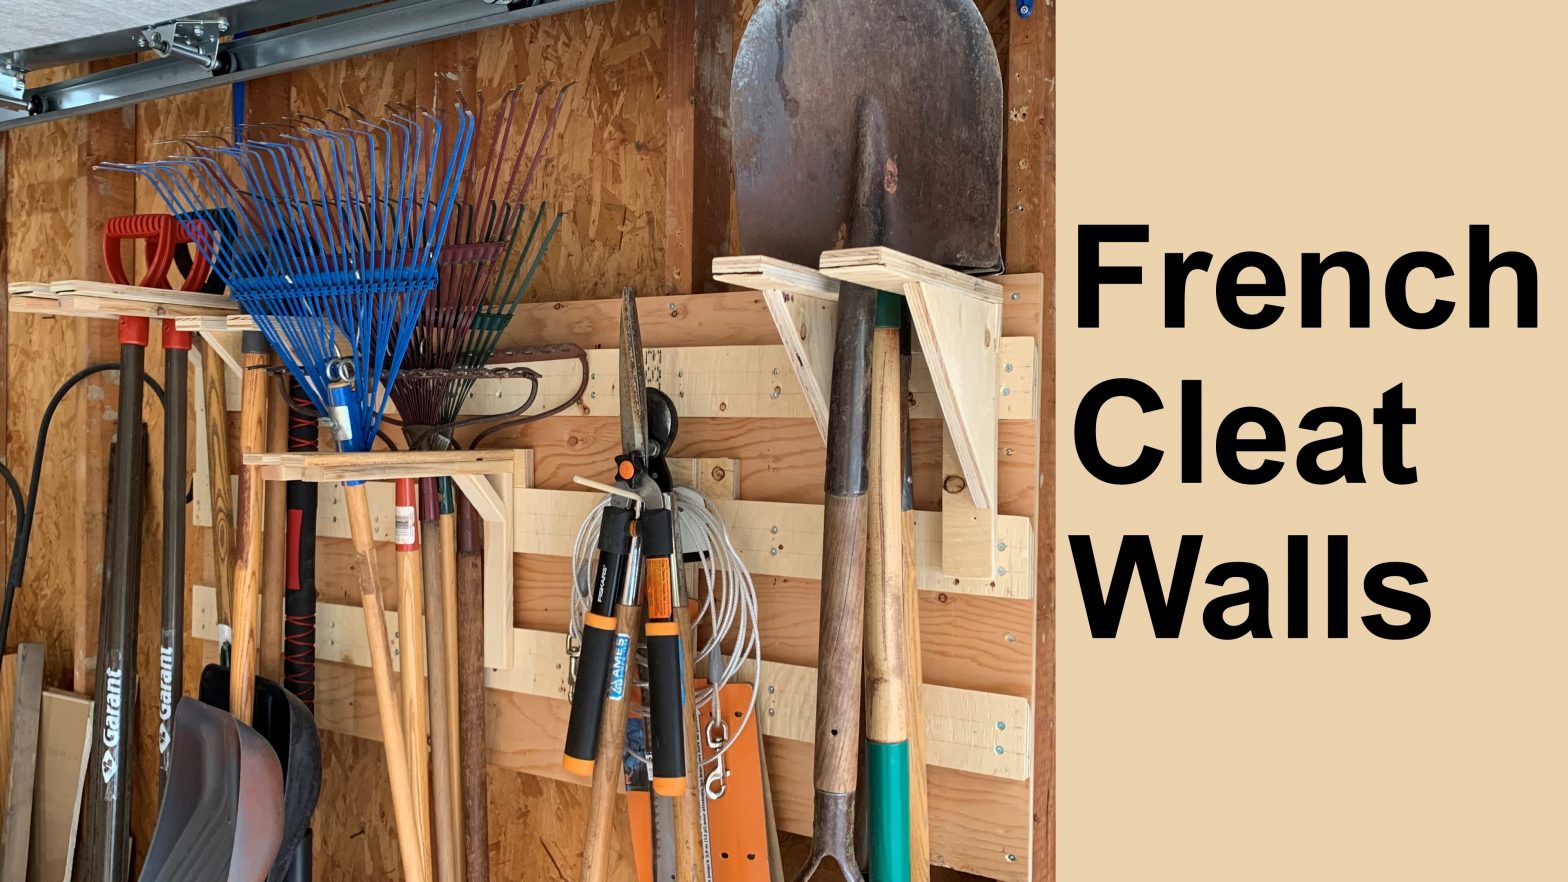 Build French Cleat Walls to Organize Your Garage